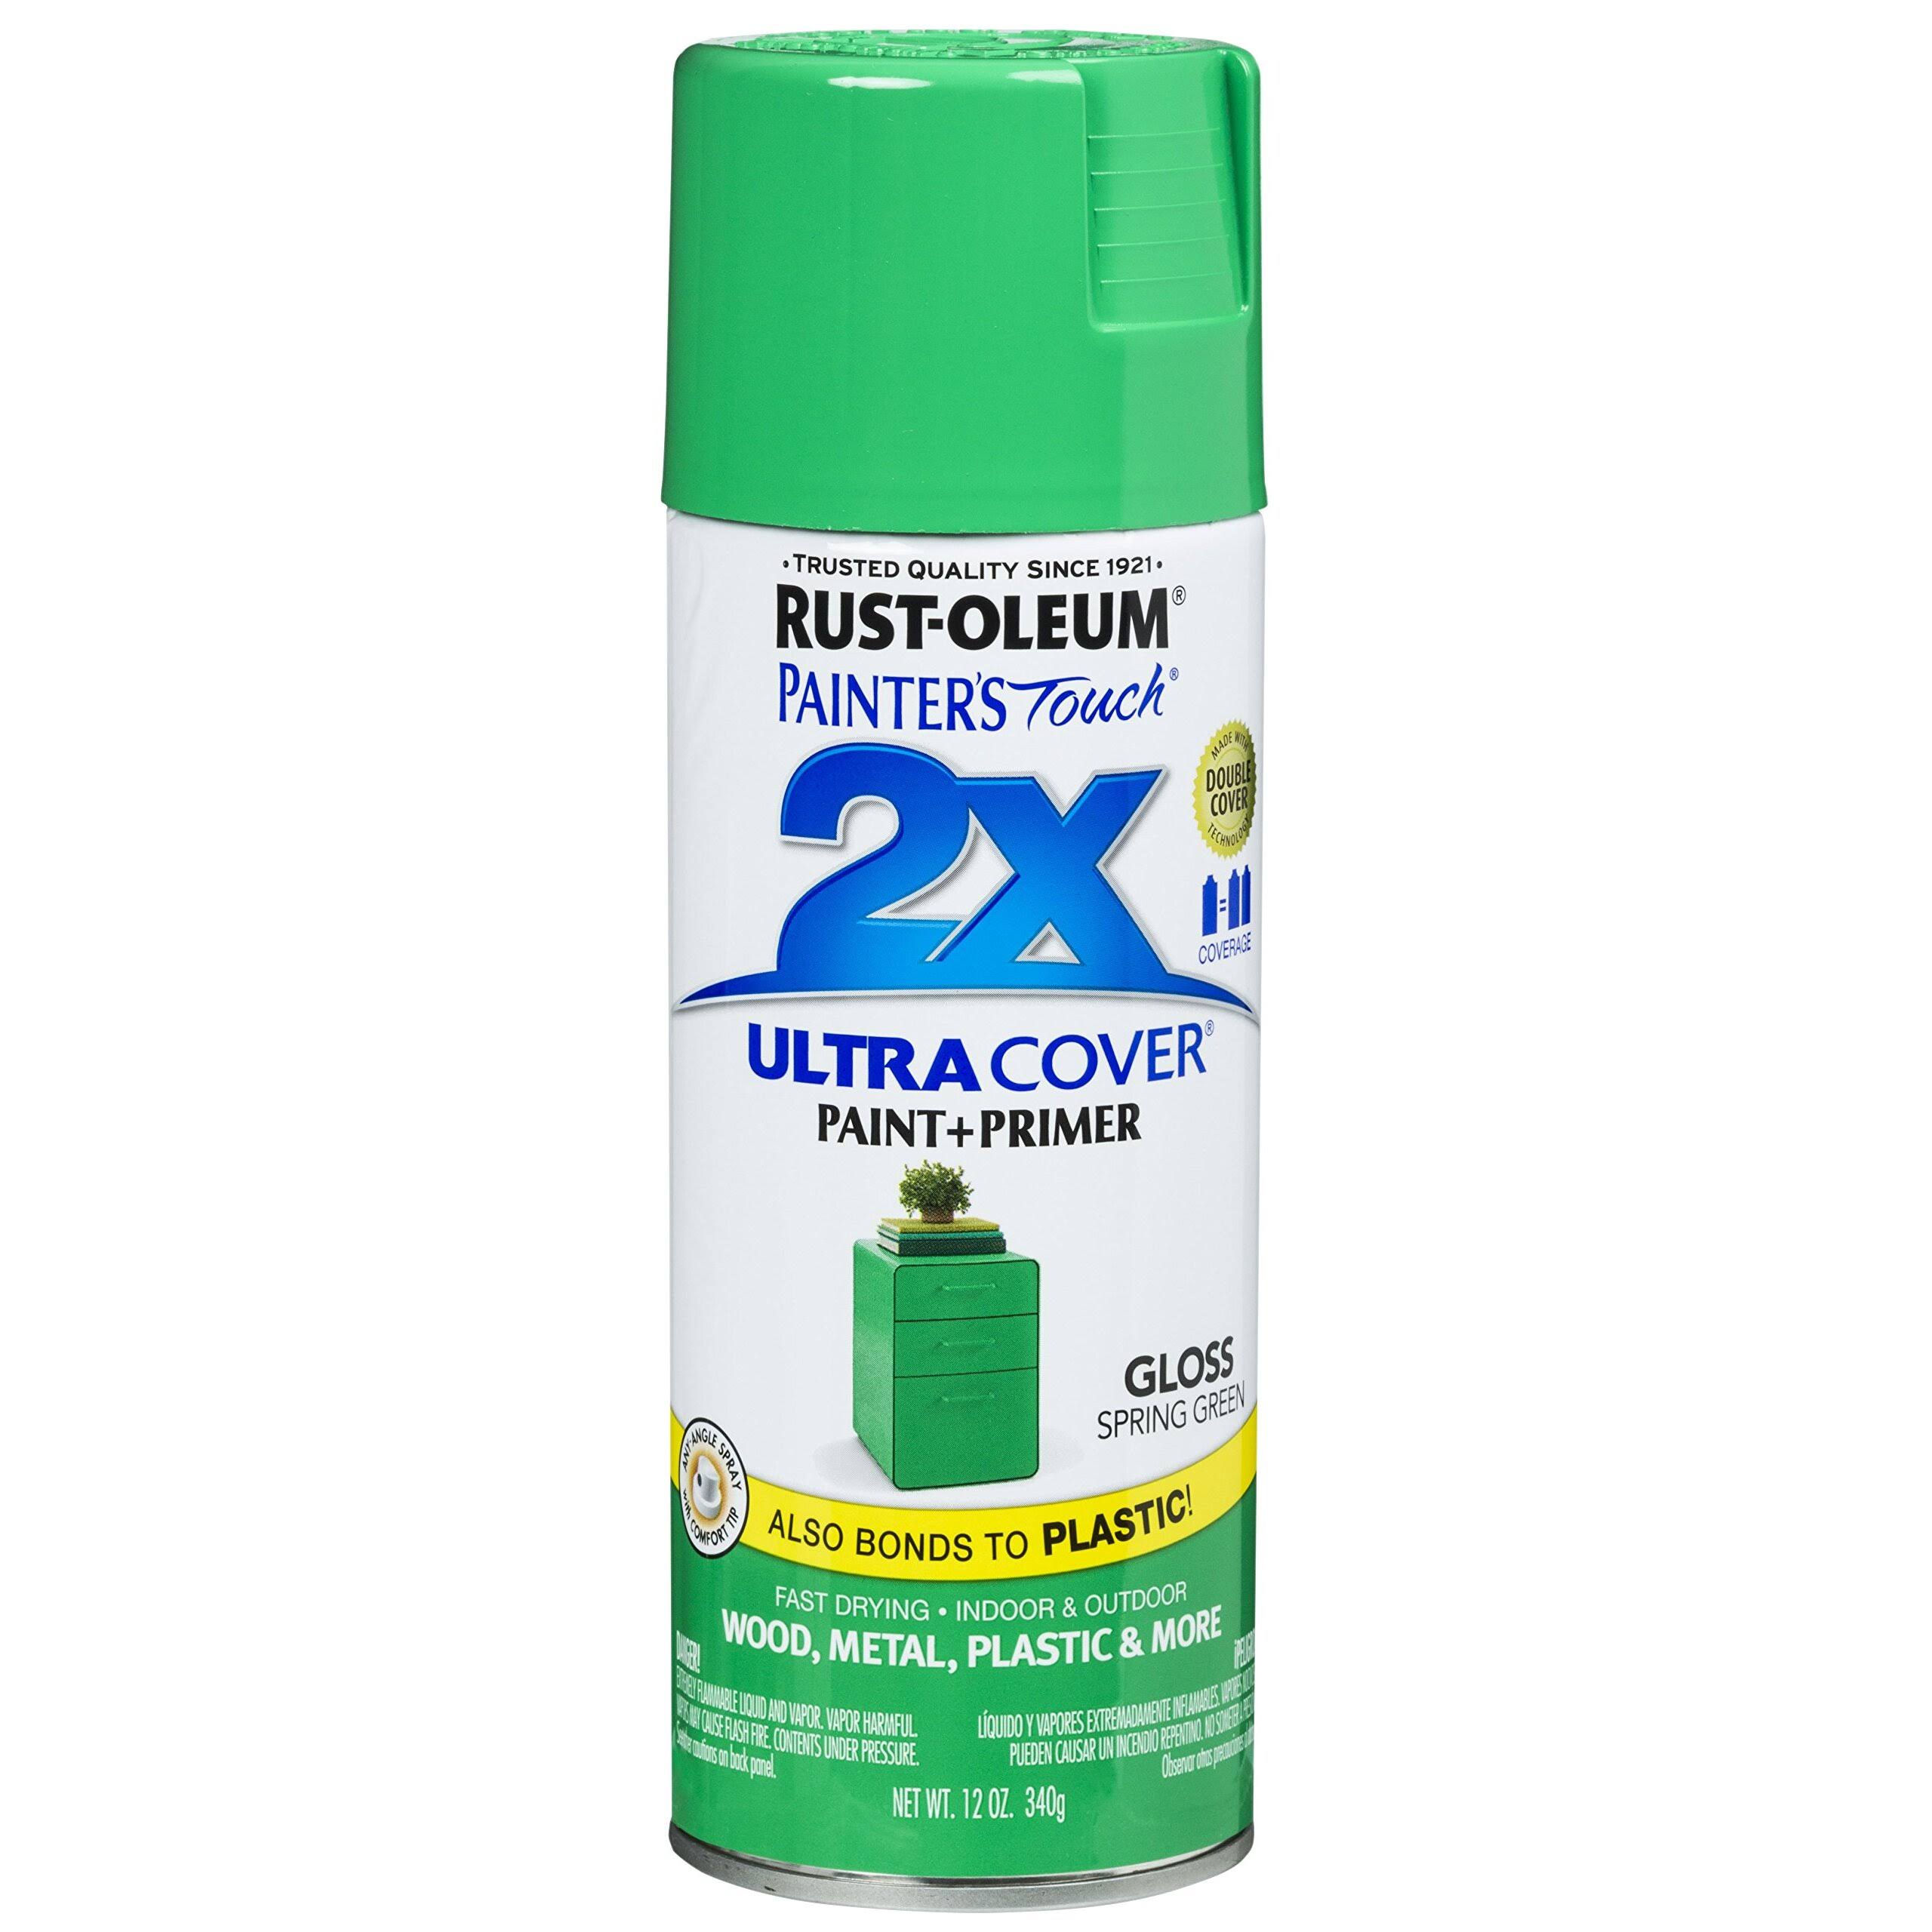 Rust-Oleum Painter's Touch 2X Ultra Cover Paint & Primer - Gloss Spring Green, 12oz